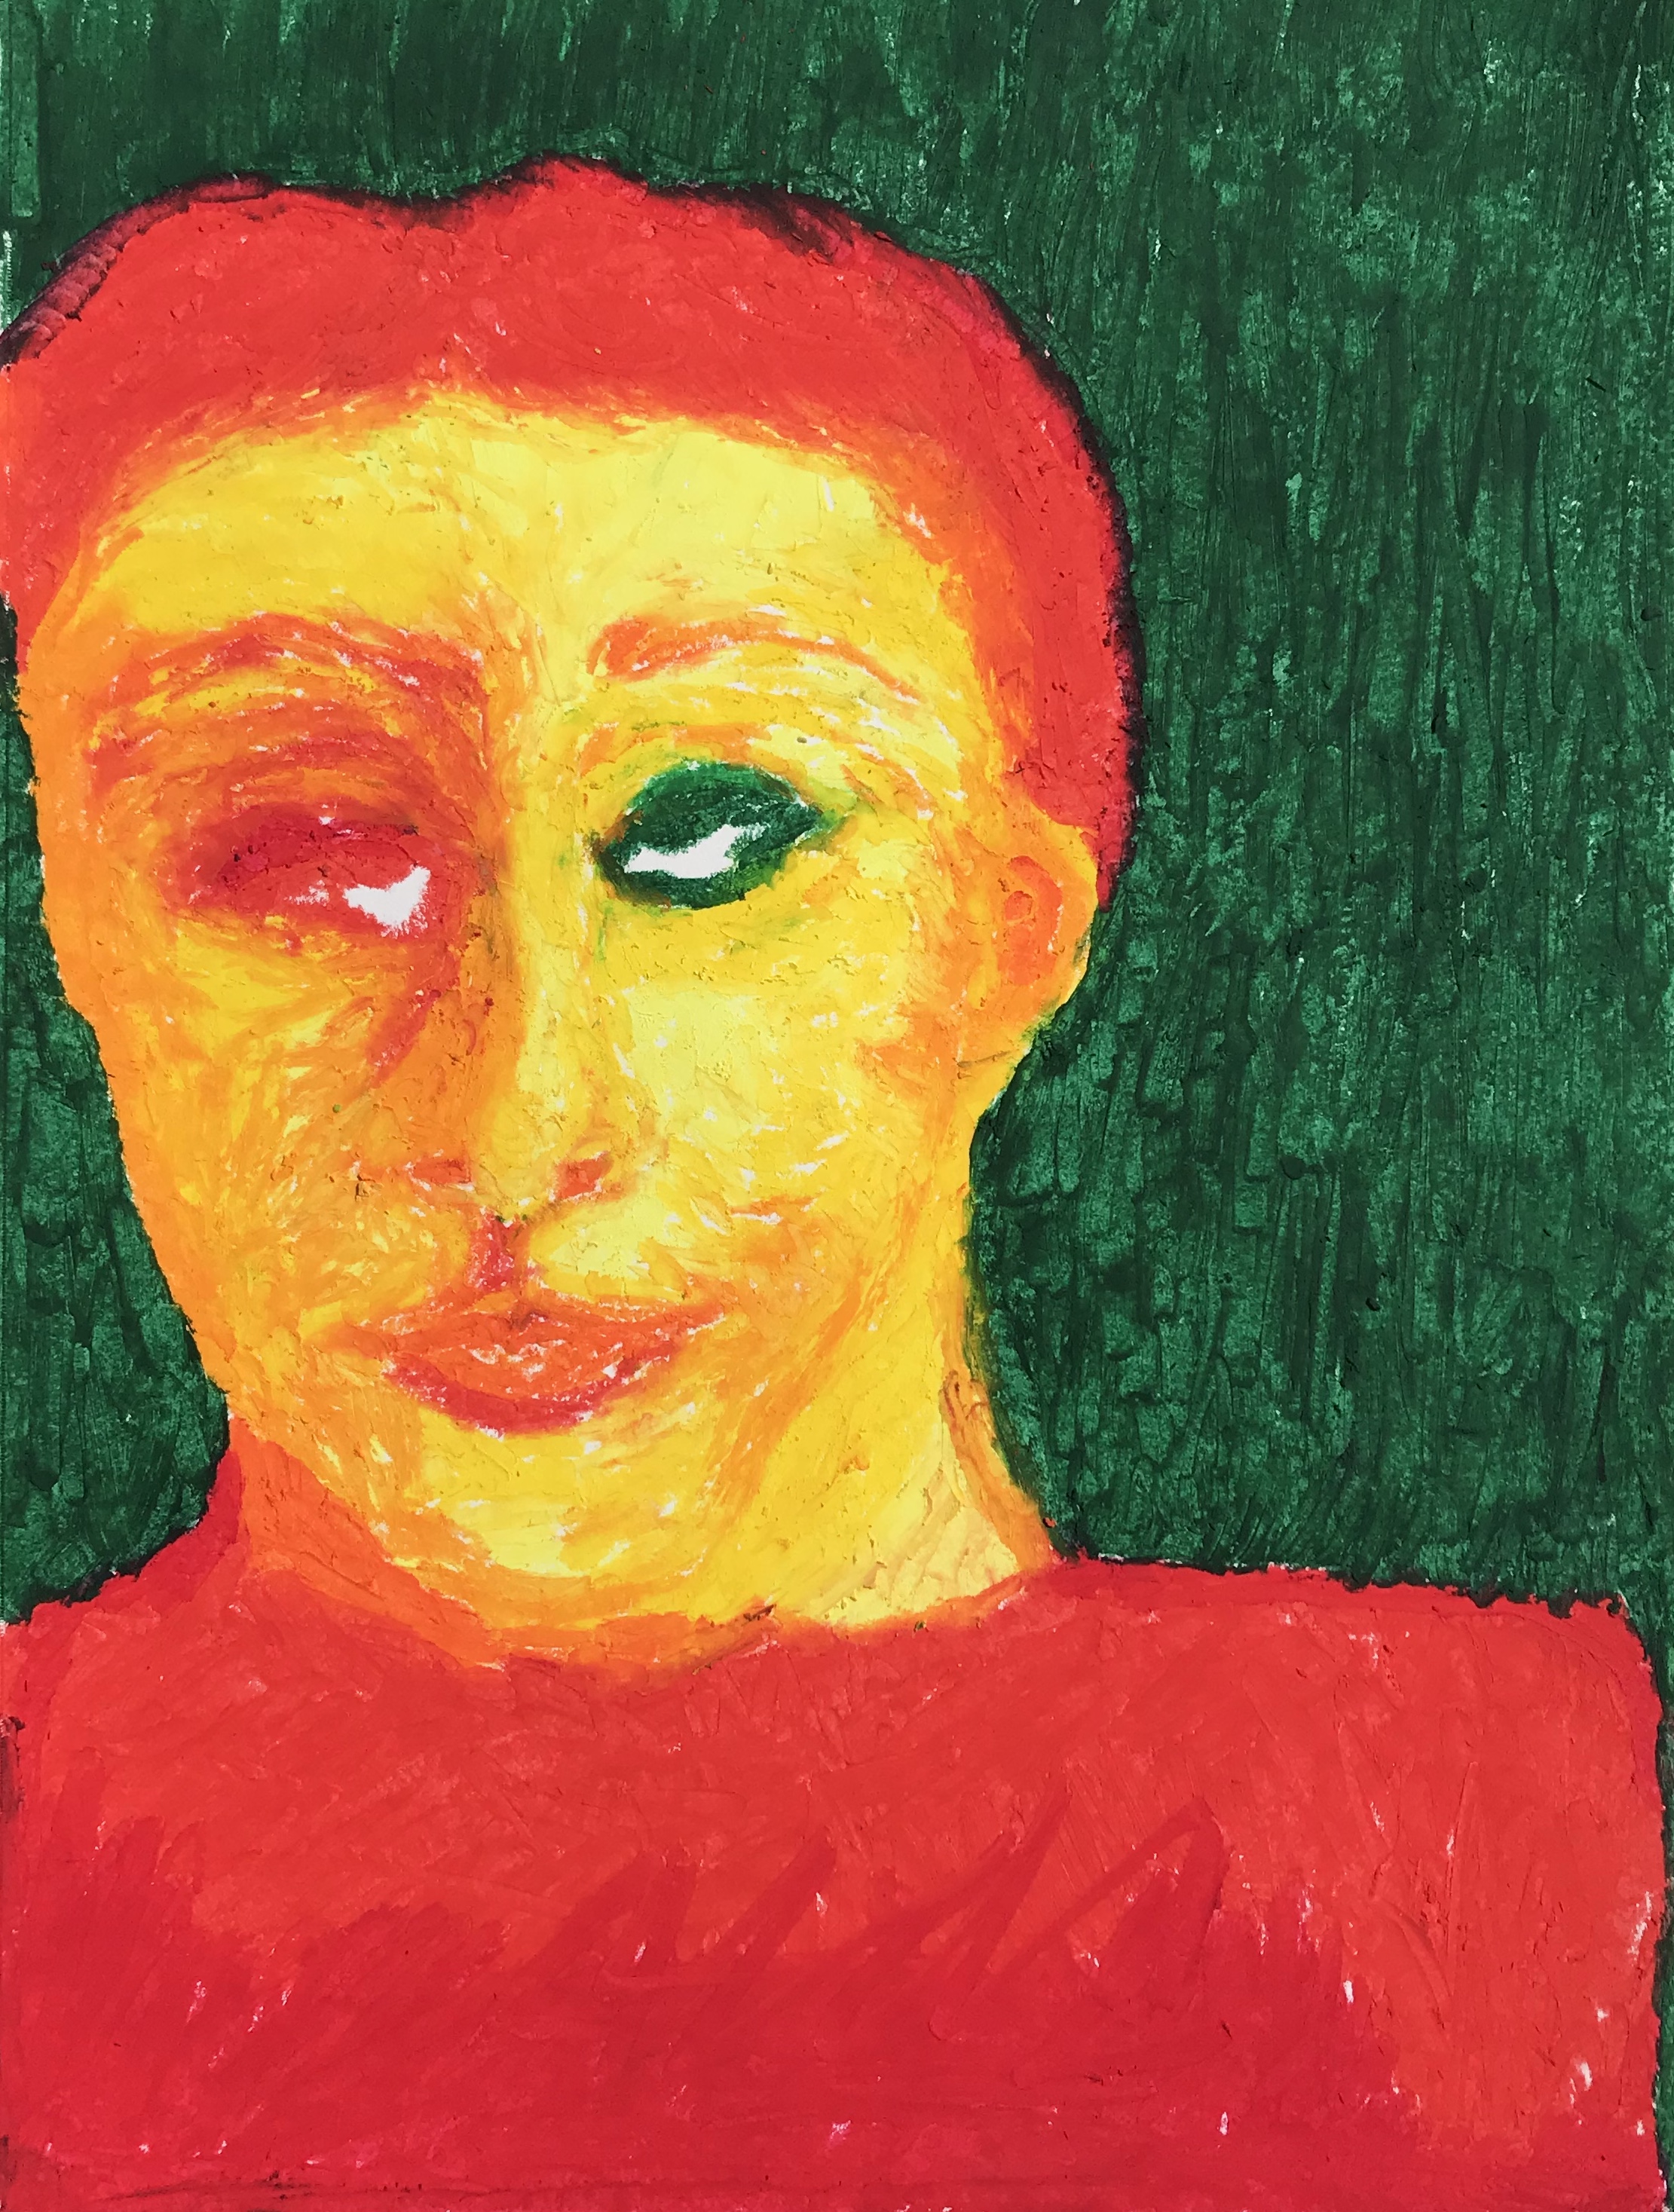 An oil pastel painting of a person, who could be a man or woman.